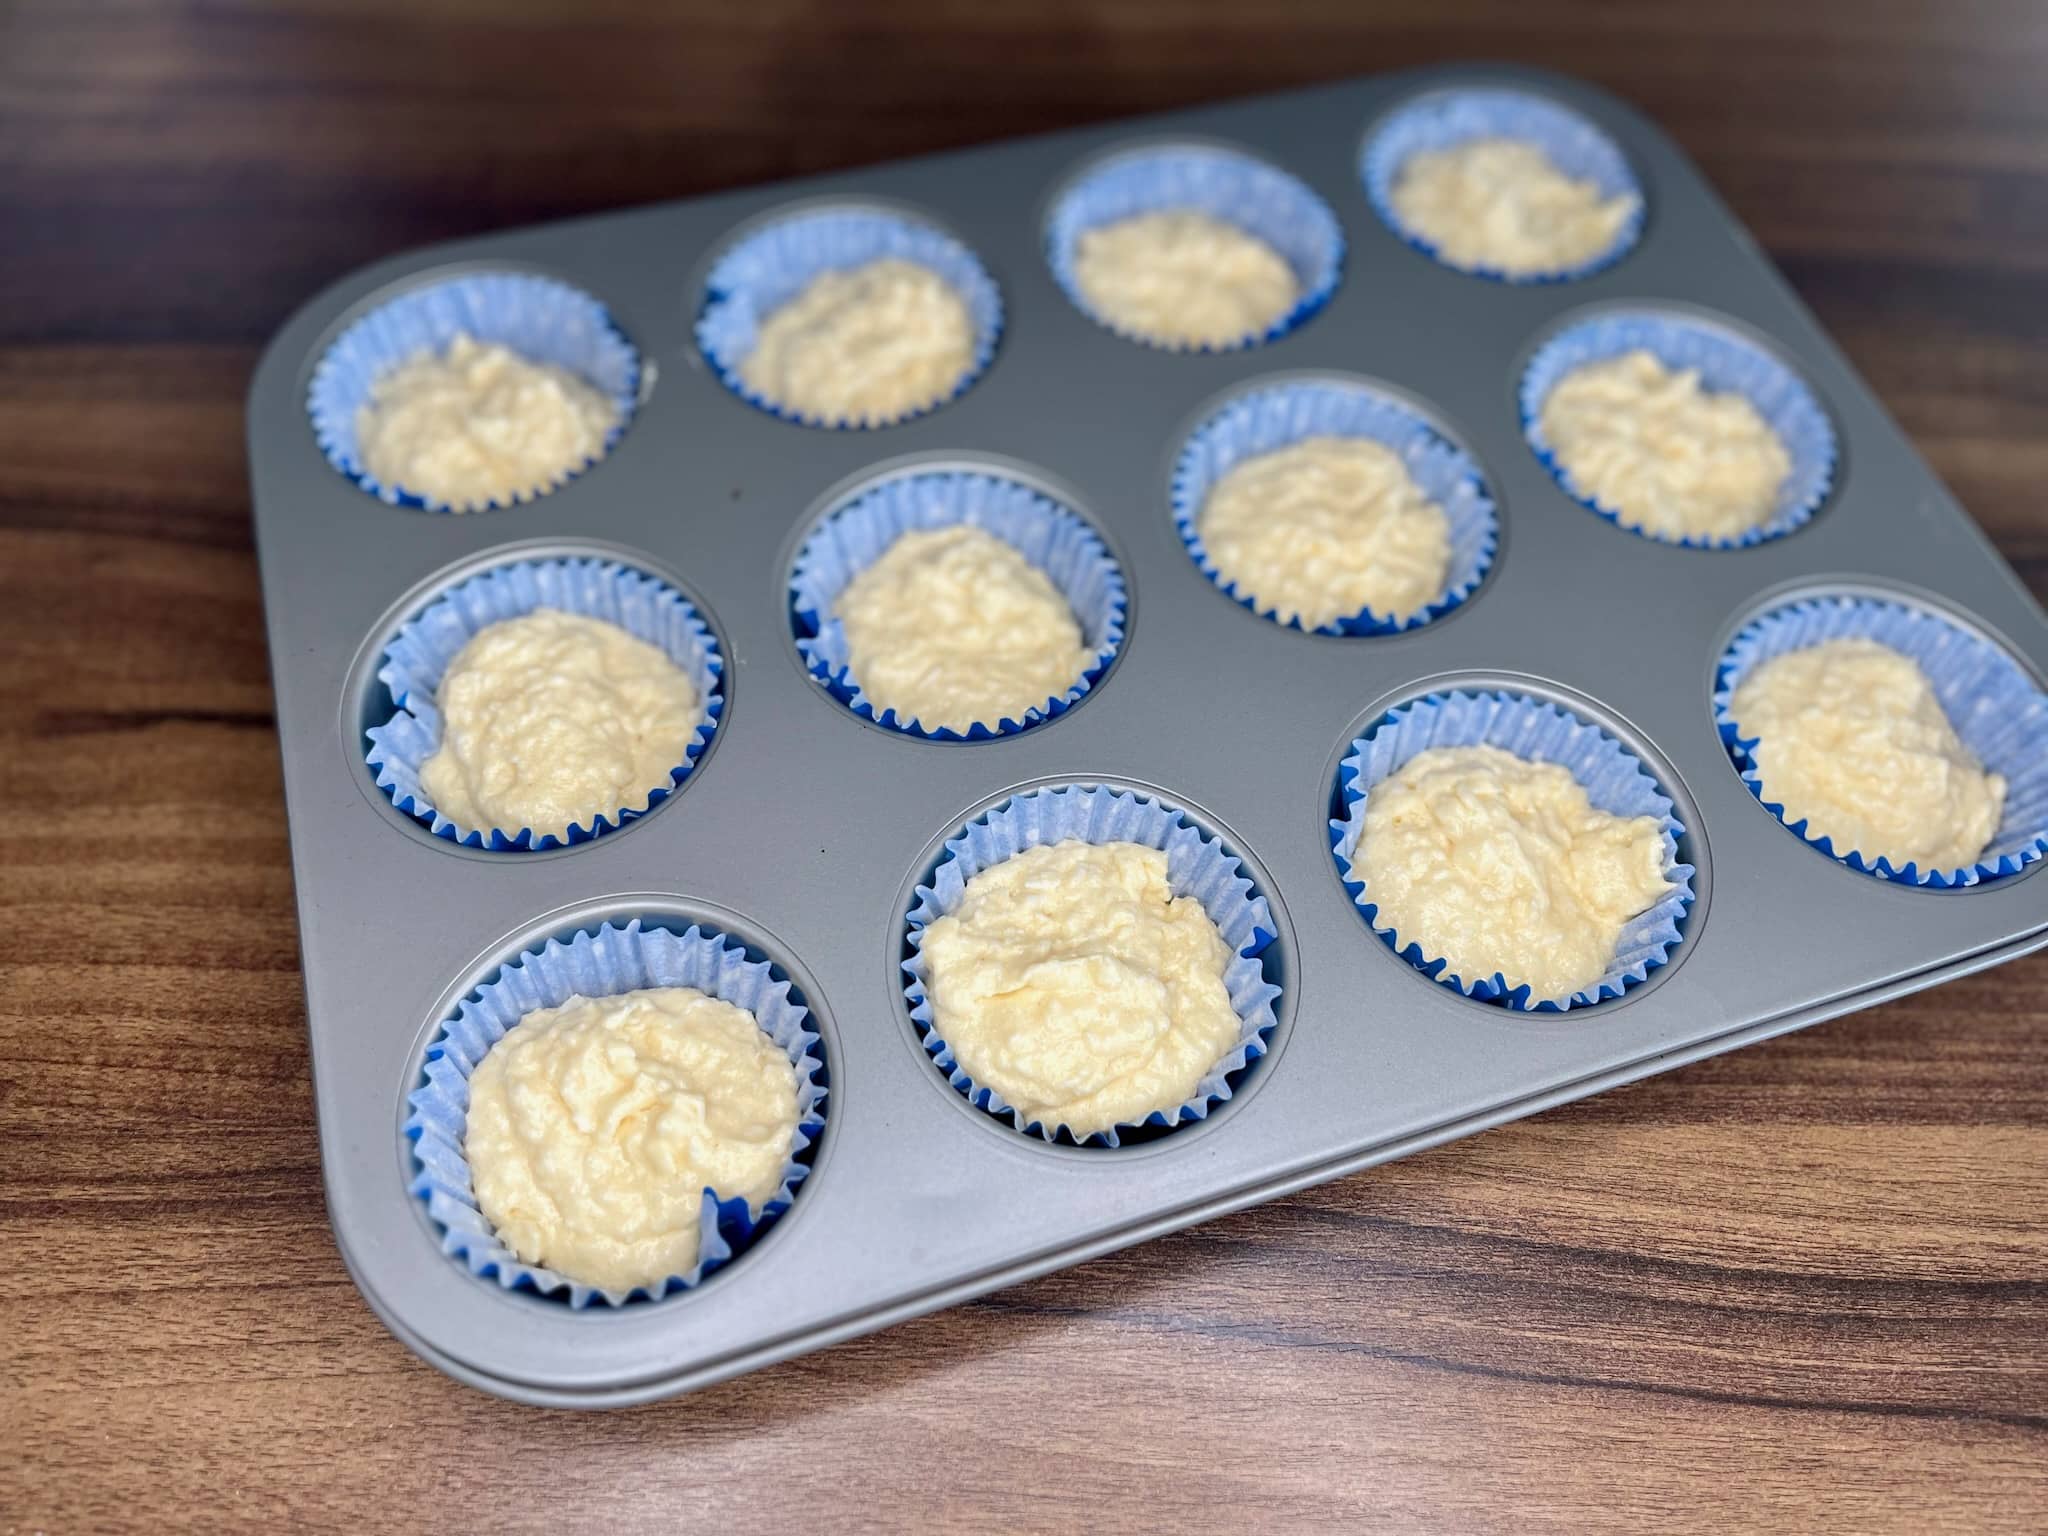 The coconut muffin mix was poured into the muffin tin.